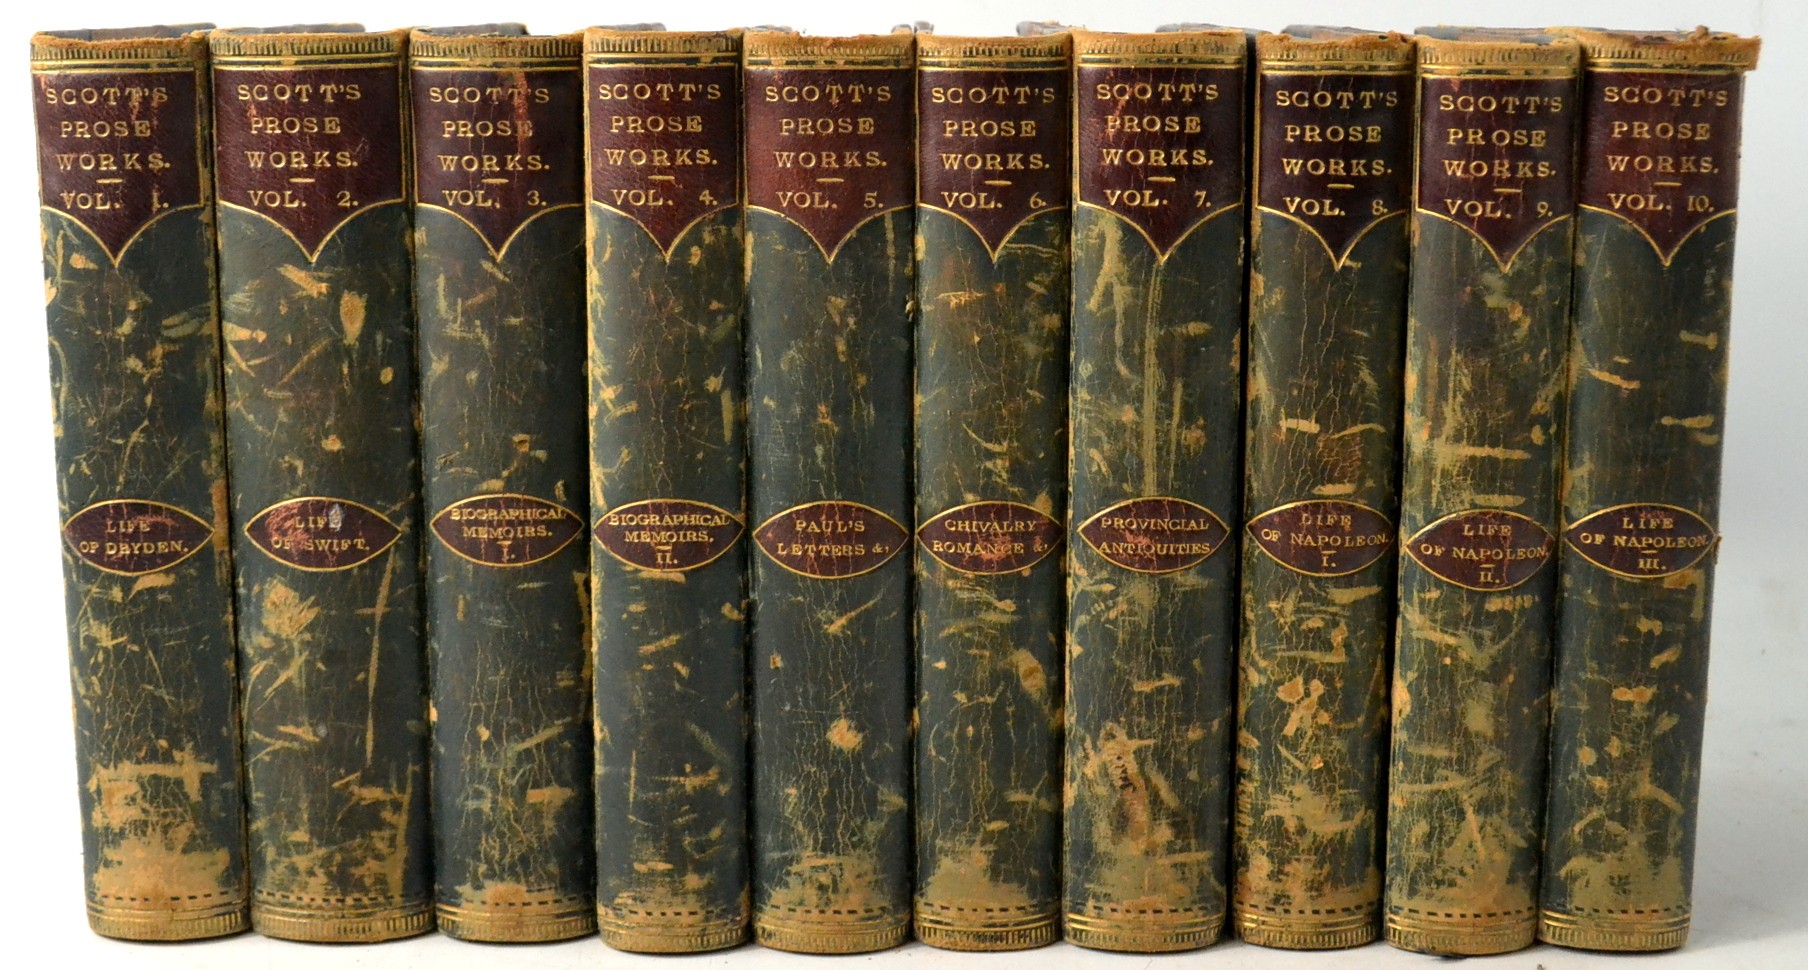 RARE Miscellaneous prose works by Sir Walter Scott (30 volumes) - Image 8 of 13